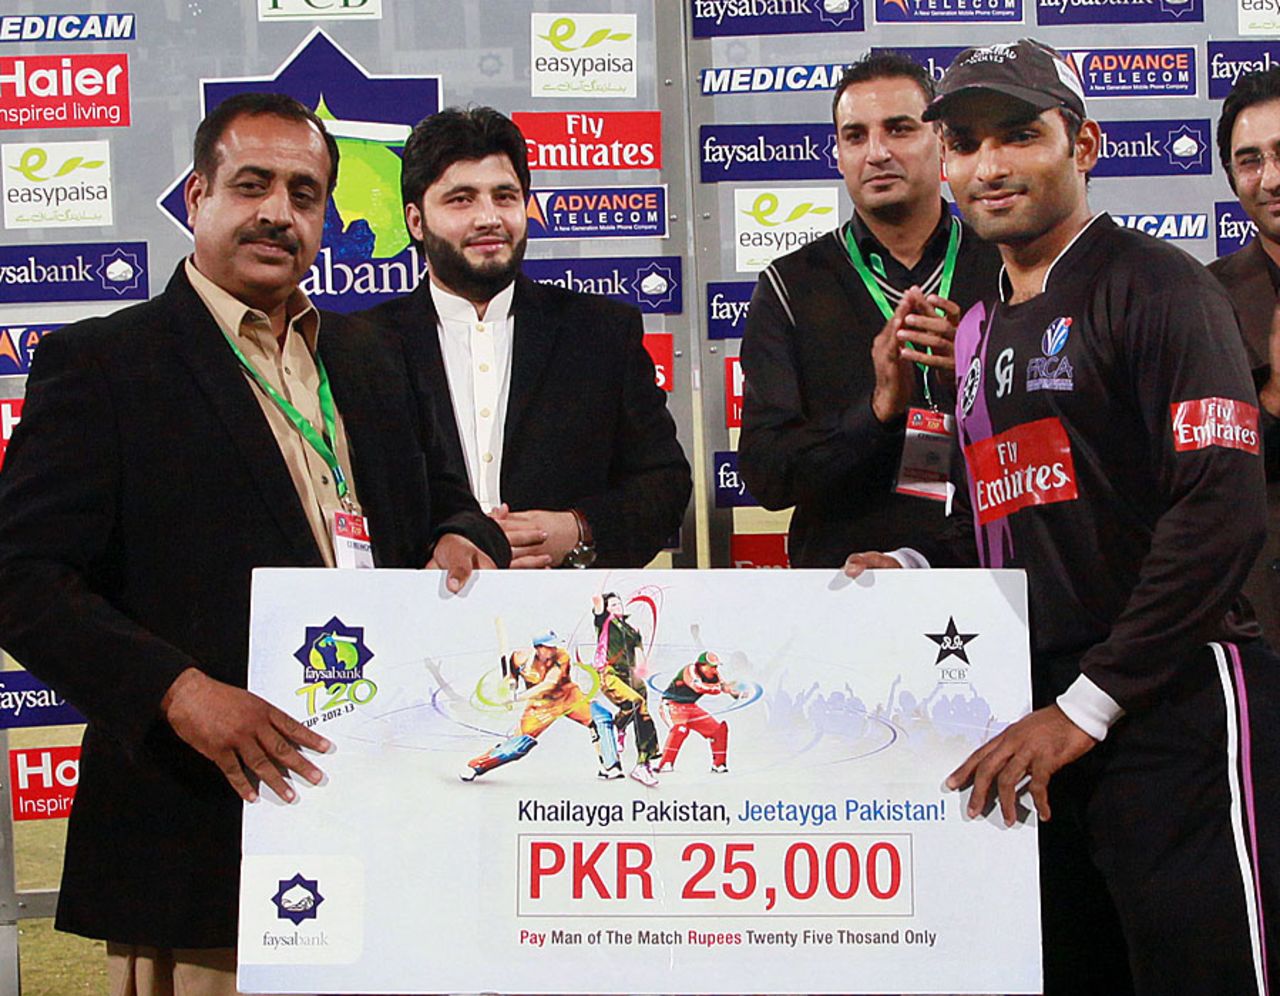 Asif Ali was the man of the match for his knock of 66, Multan Tigers v Faisalabad Wolves, semi-final, Faysal Bank T-20 Cup, December 8, 2012